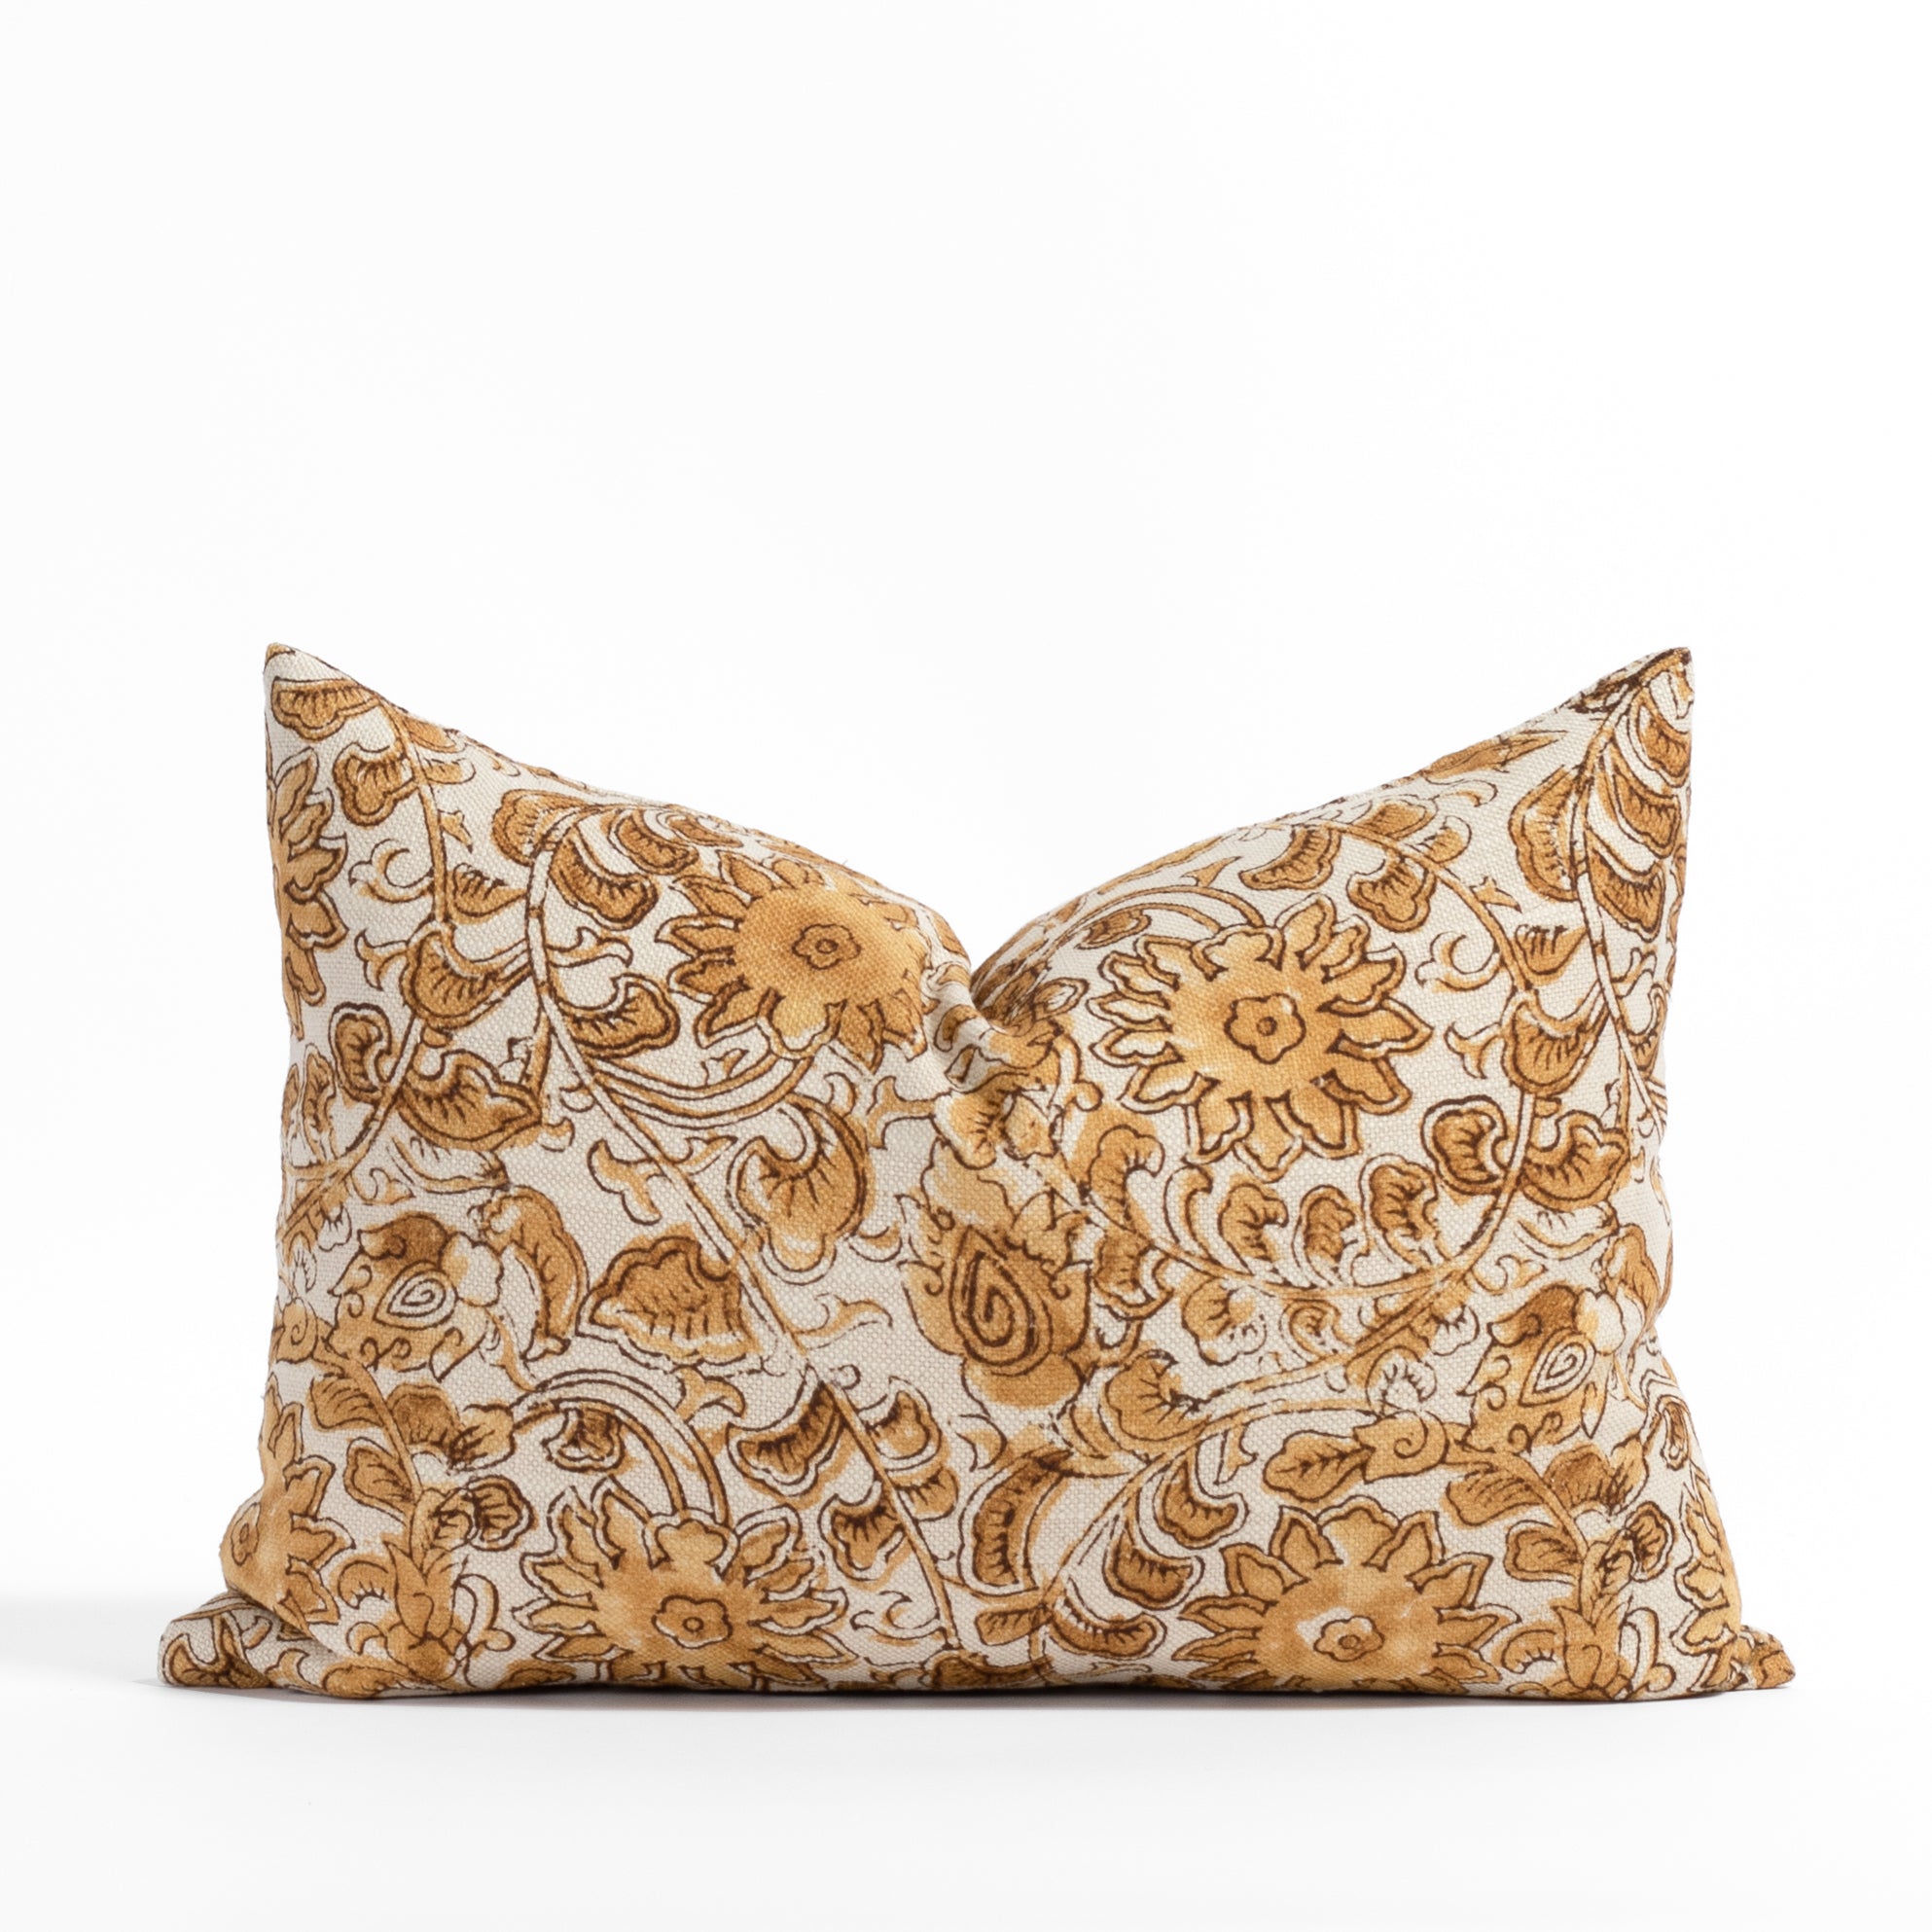 Paisley Cream Sofa Collection with Floral Accent Pillows